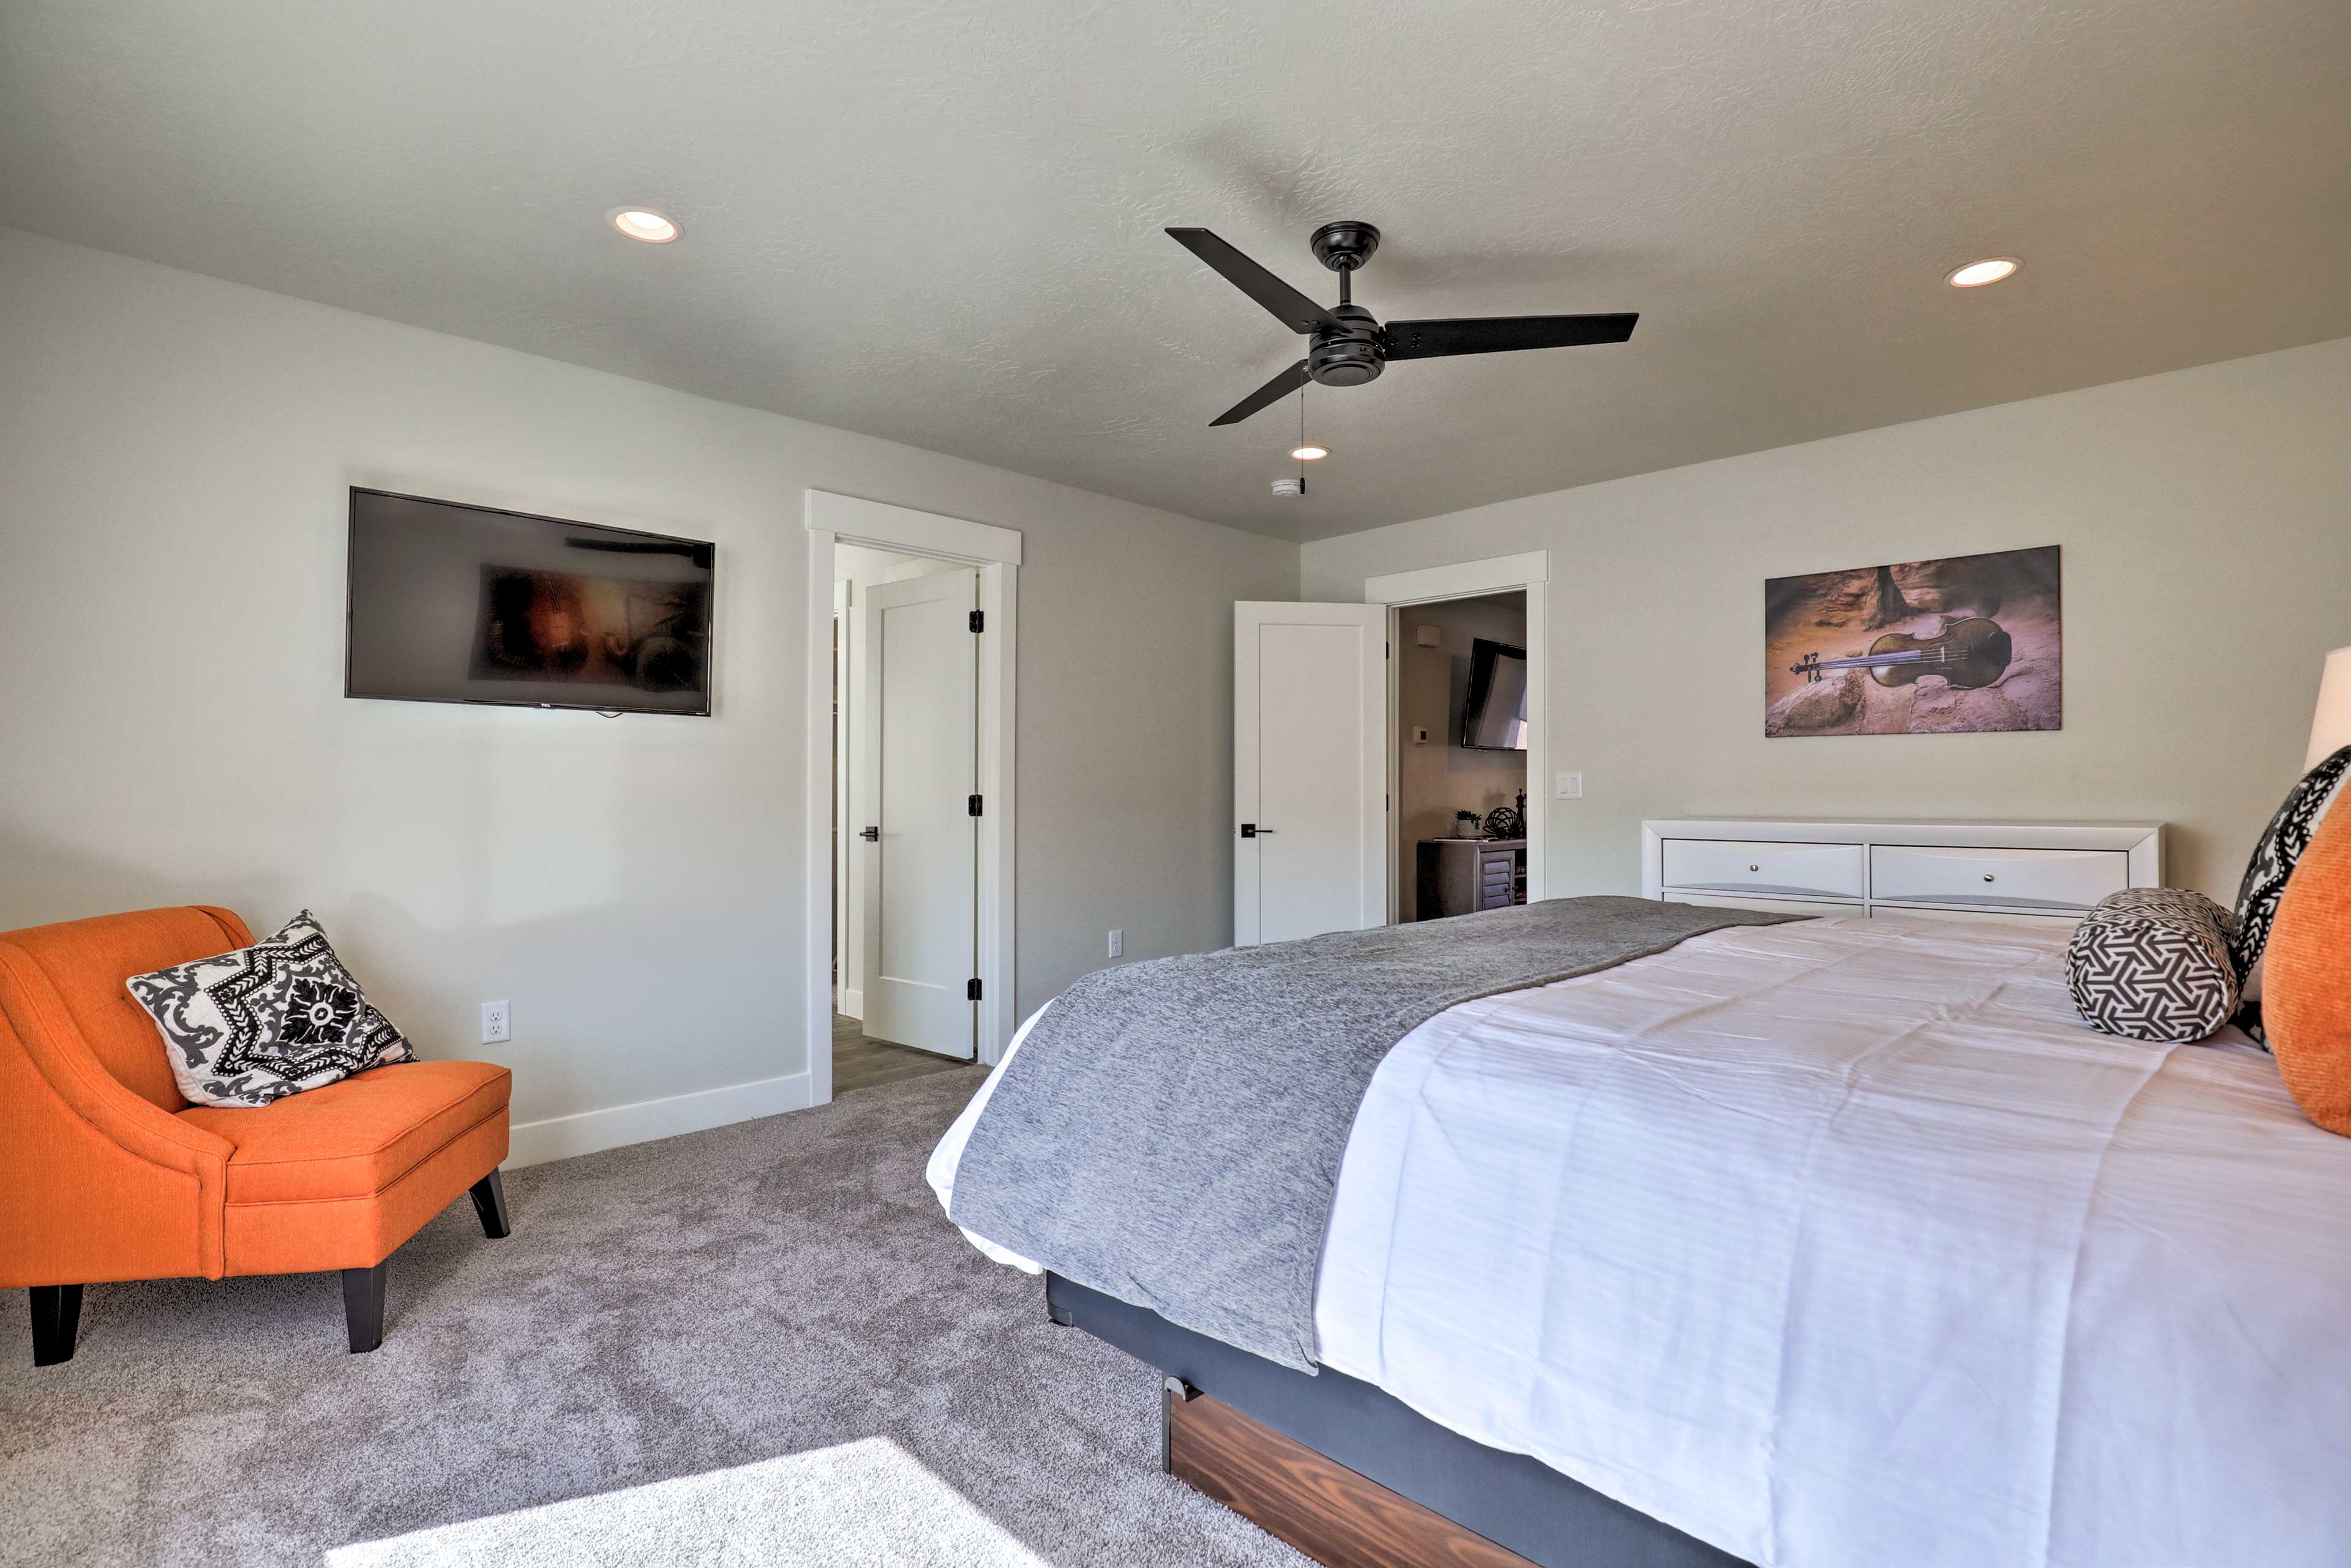 The room offers a king bed and Smart TV.